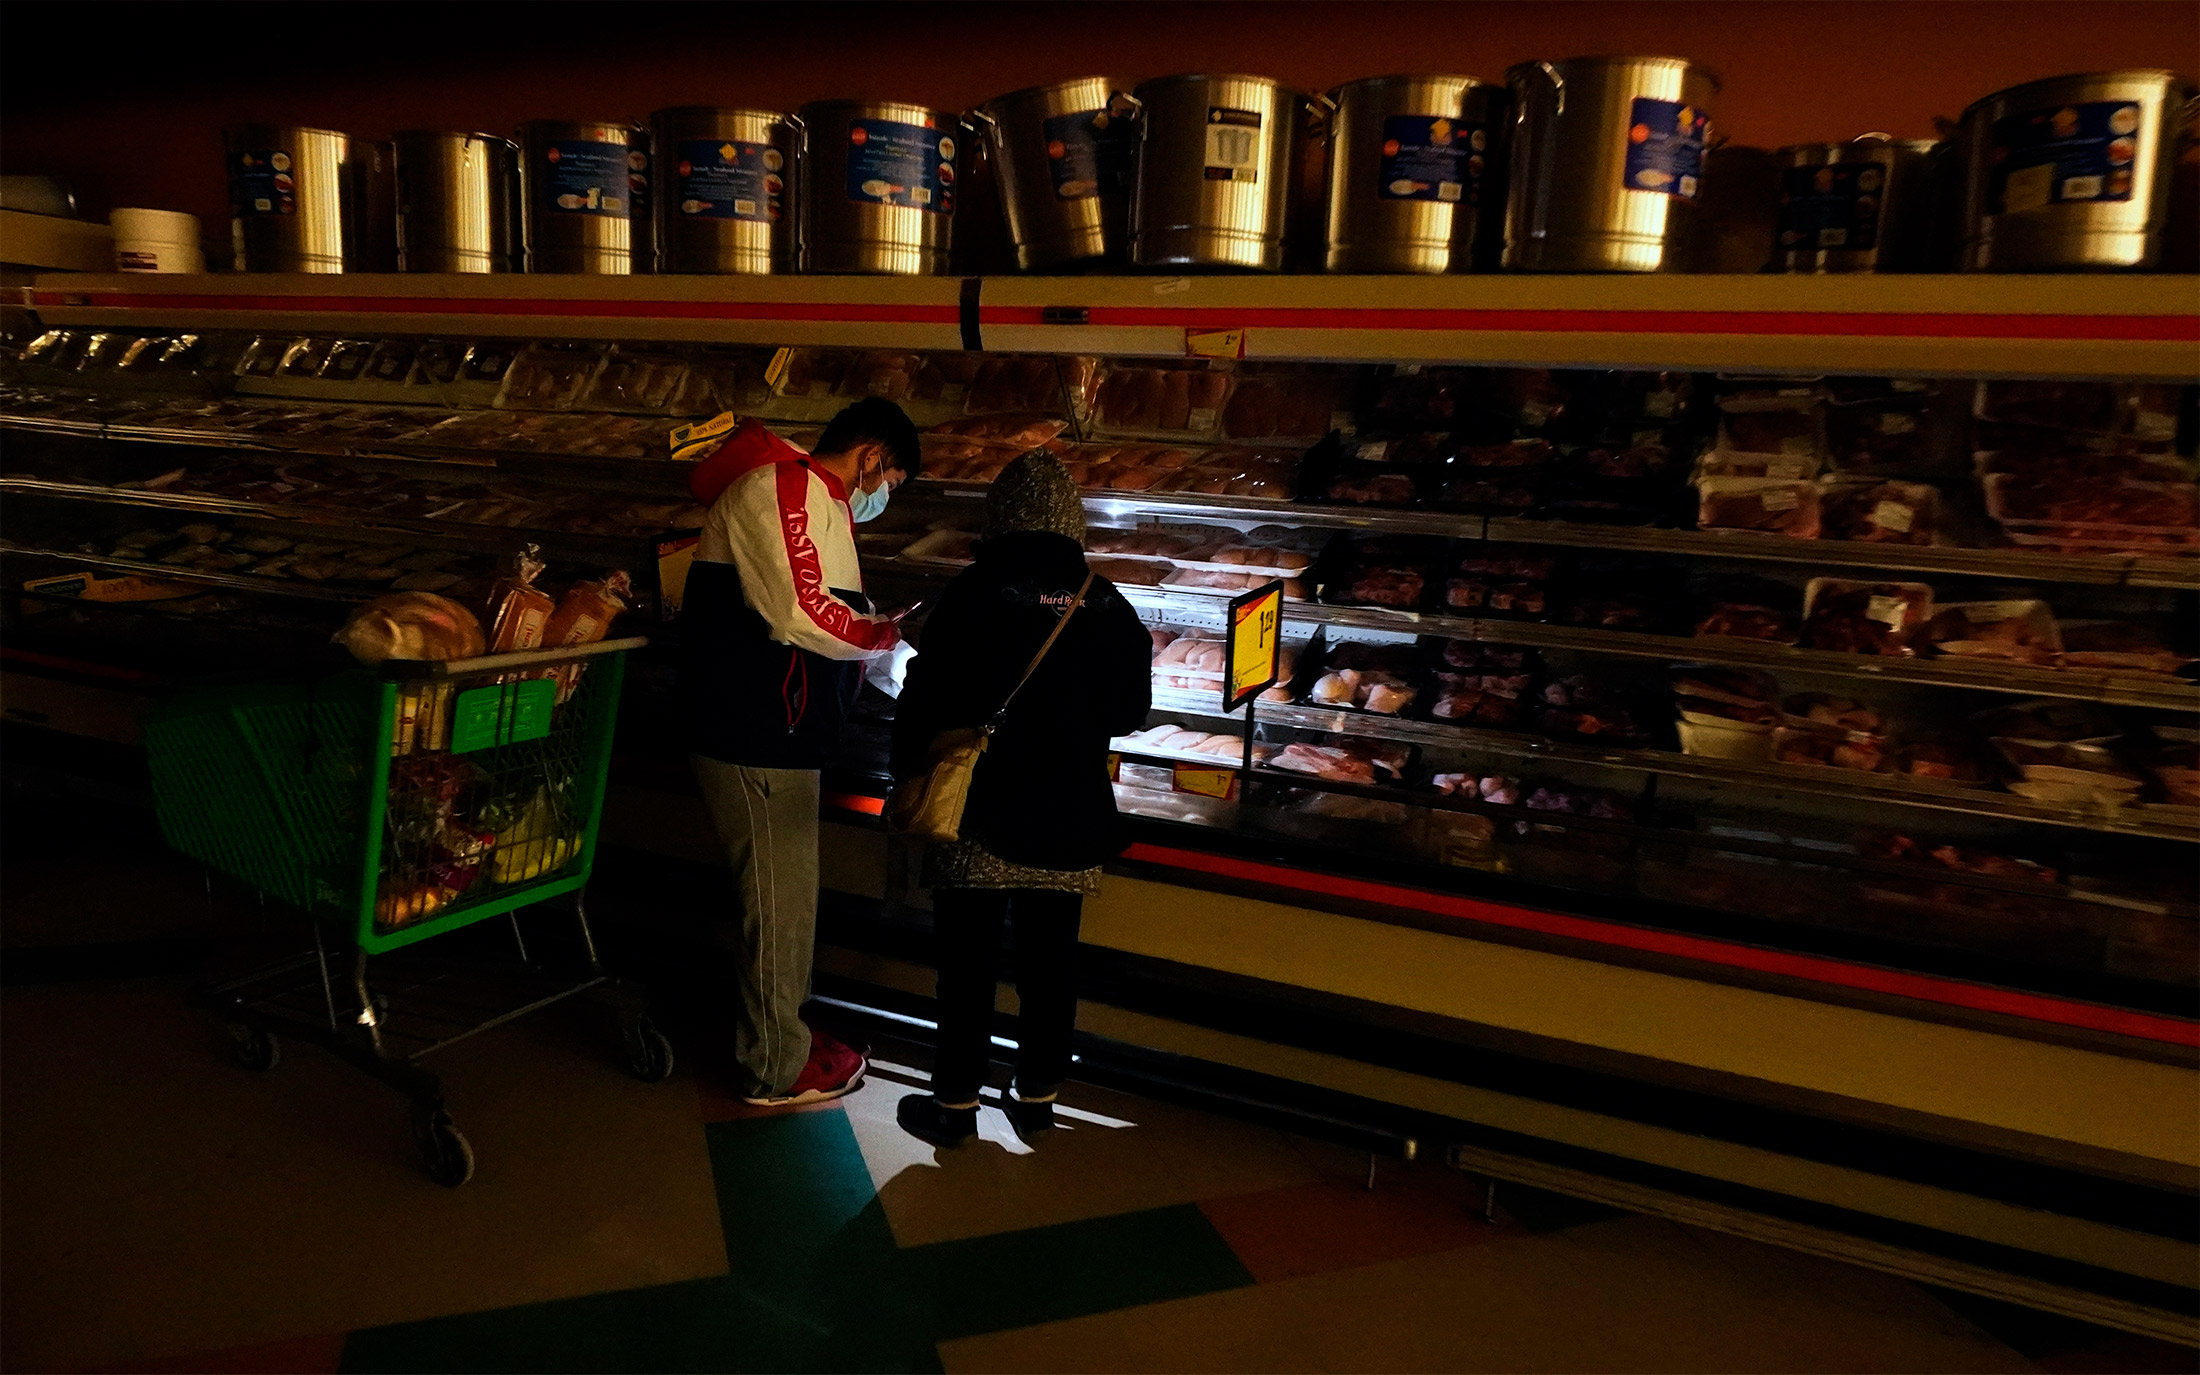 Customers use the light from a cell phone to look in the meat section of a grocery store in Dallas on Feb. 16.